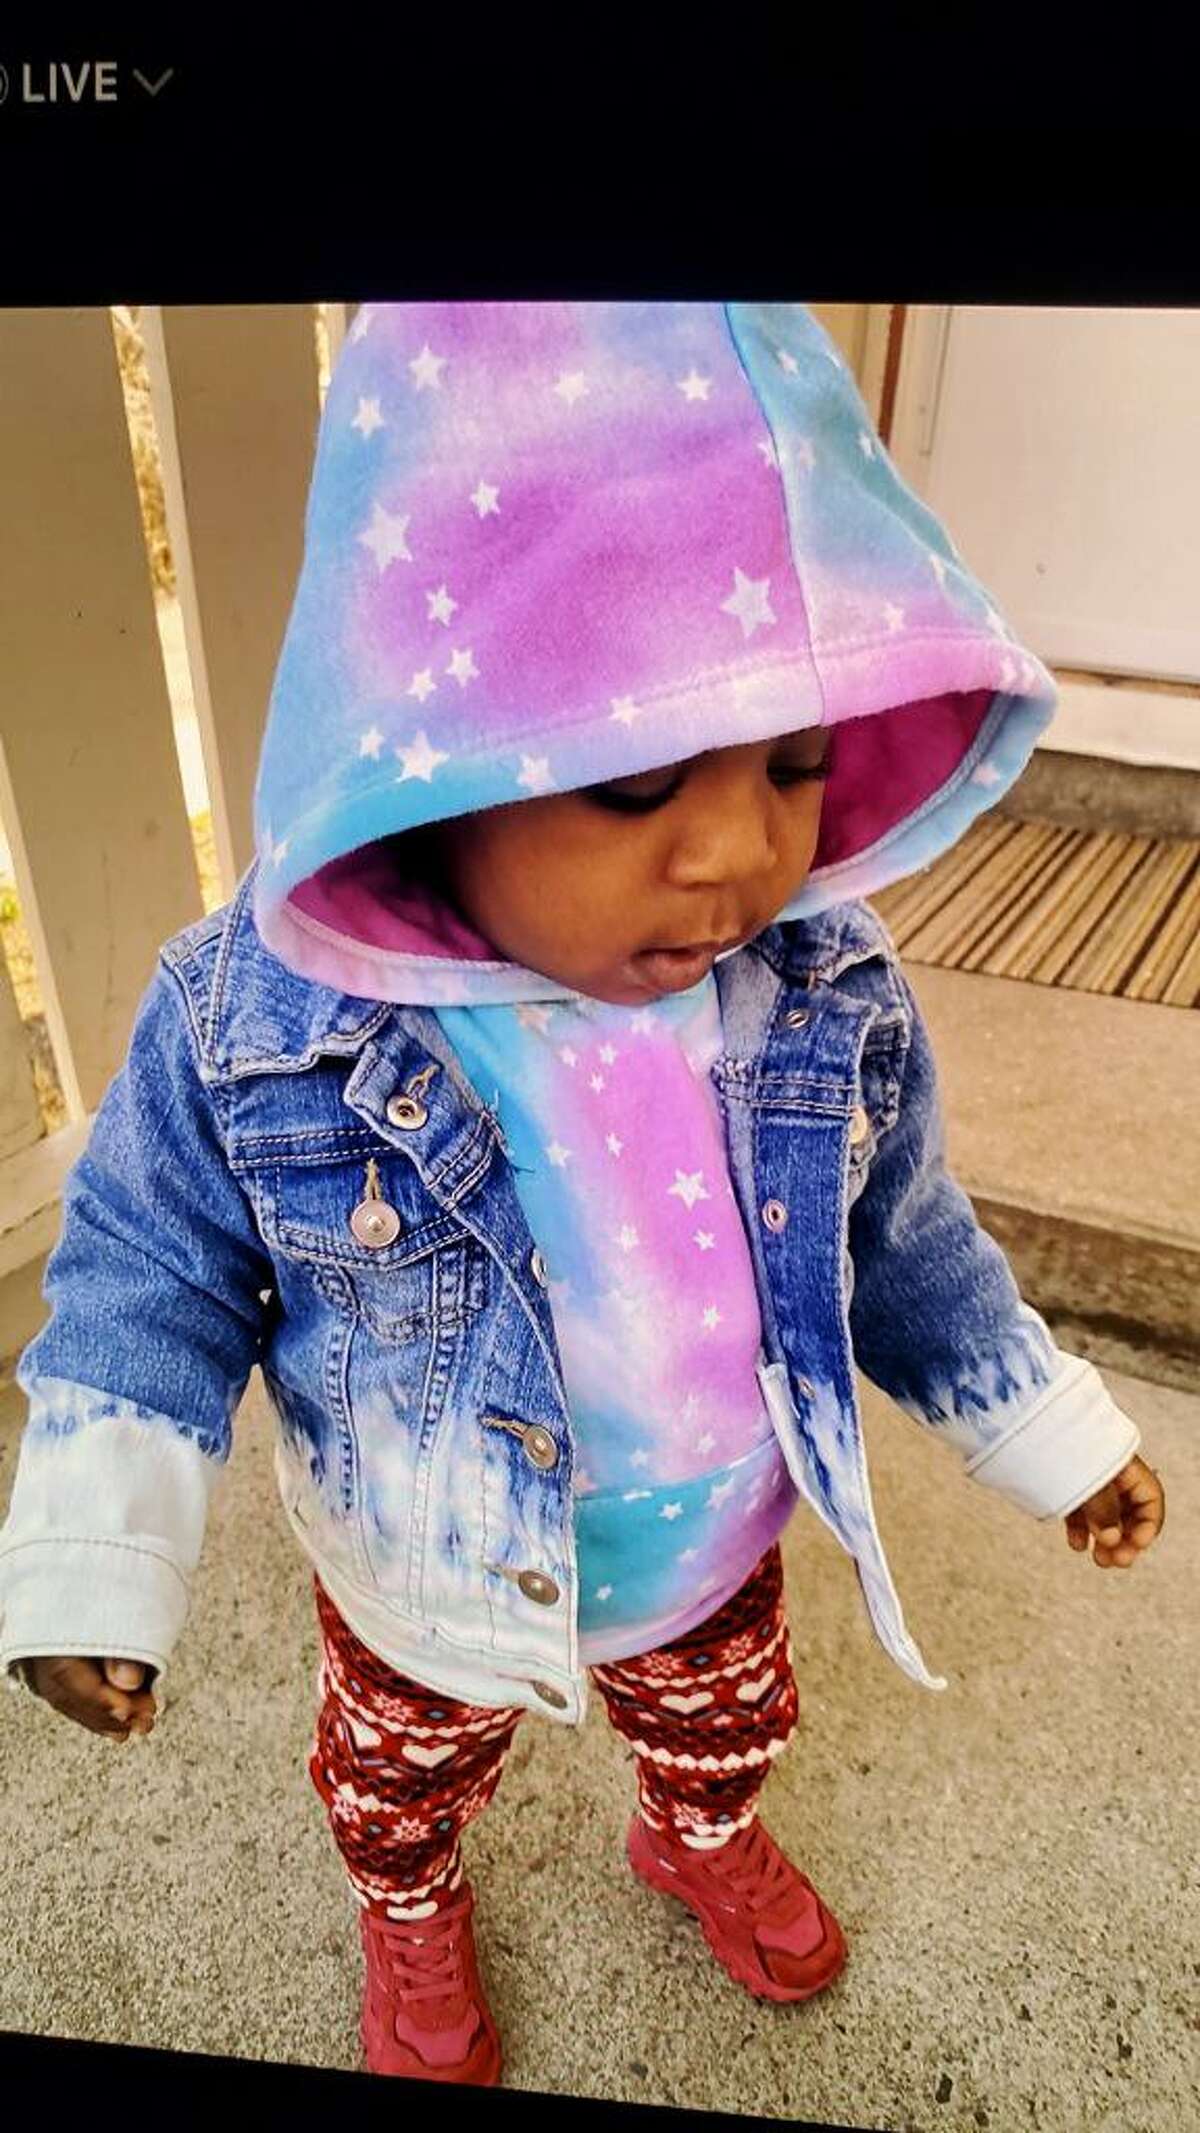 Police are searching for 11-month-old Jalayjah Douglas. Her biological father, James Douglas, lost custody of her last month and took her from her foster parent on the west side of the city Friday night, police said. Jalayiah was last seen wearing pink Reebok sneakers and a jean jacket with a pink hooded sweatshirt underneath. The hooded sweatshirt has the words “God Bless Me” on the front, according to police.